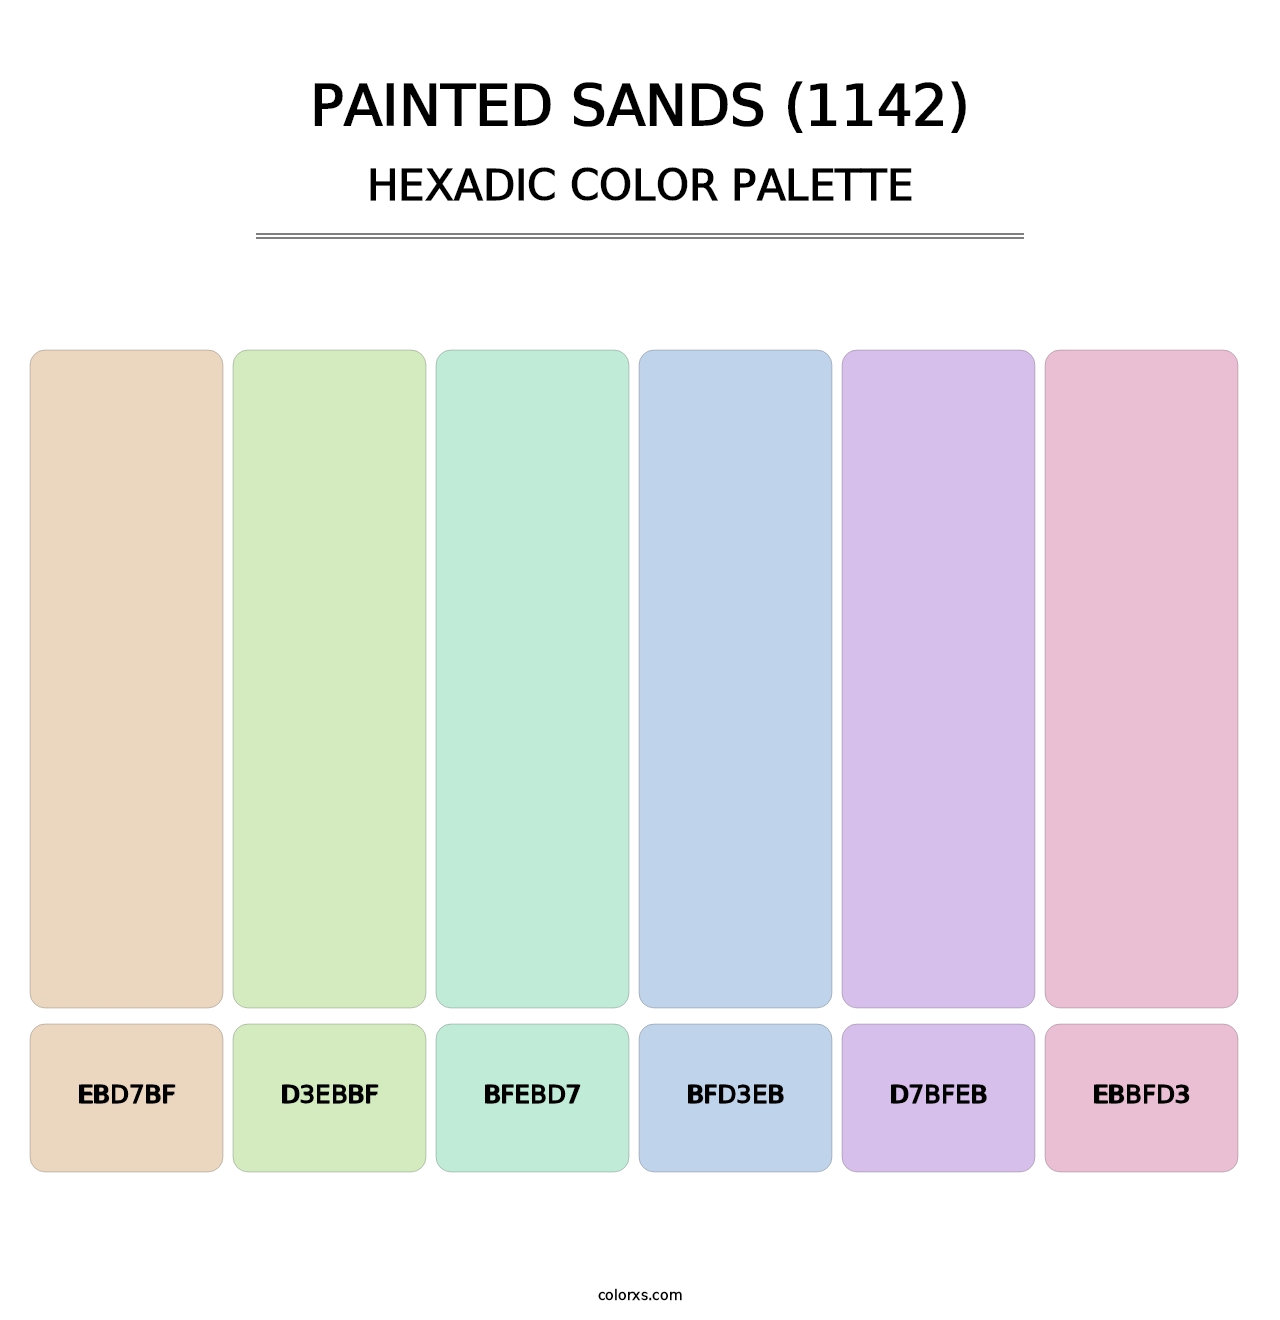 Painted Sands (1142) - Hexadic Color Palette